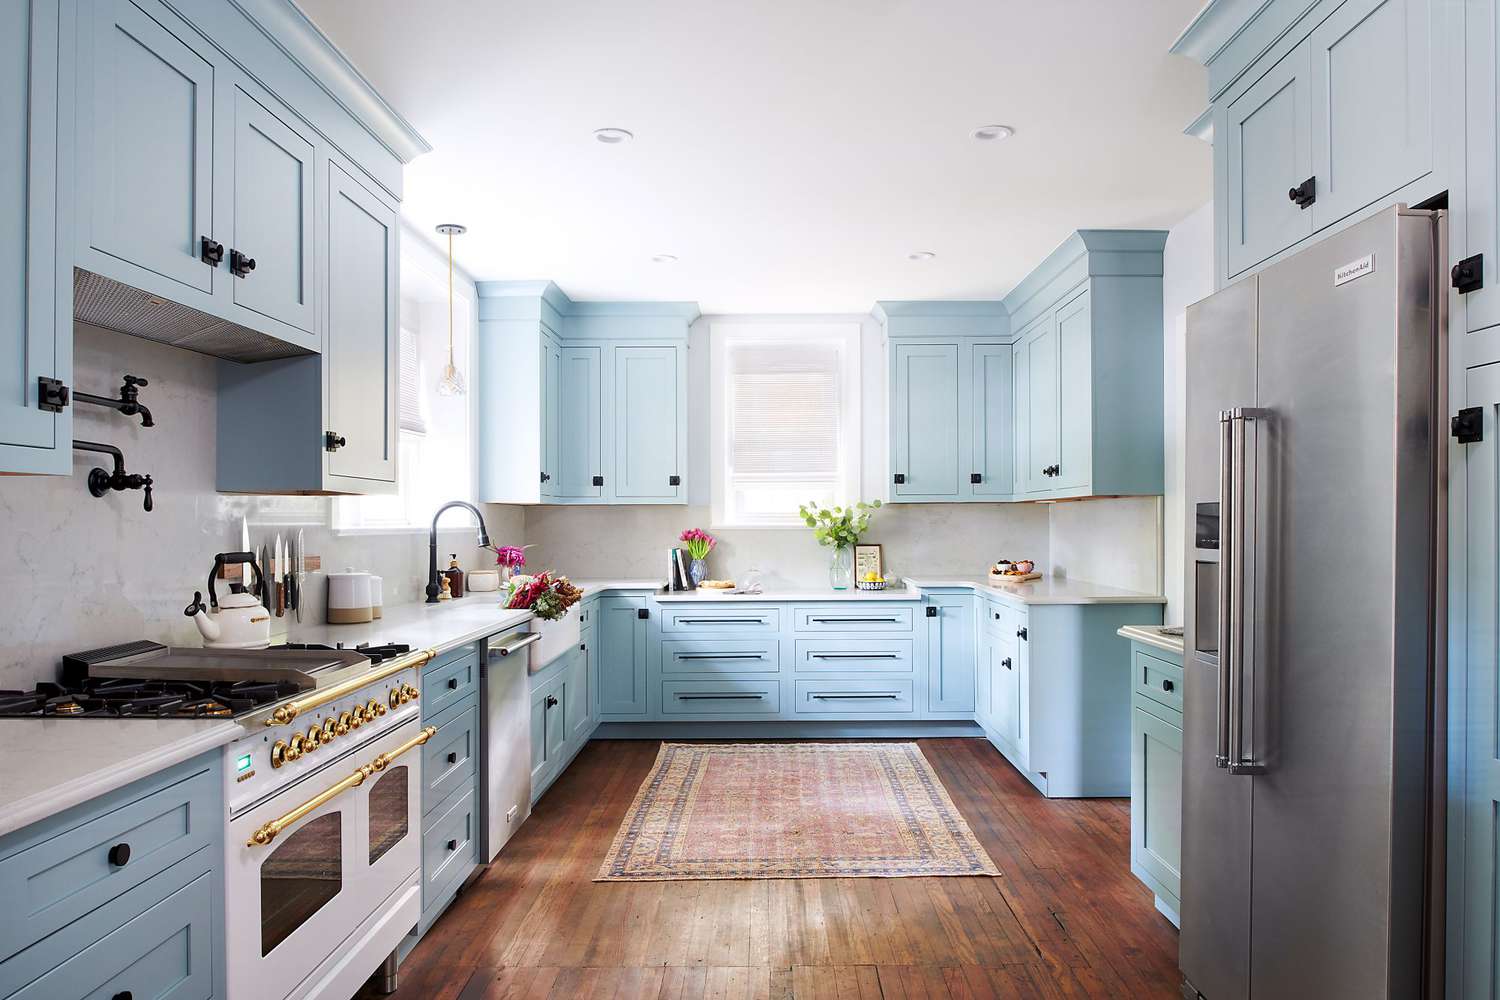 The best colors for kitchen appliances according to interiors experts